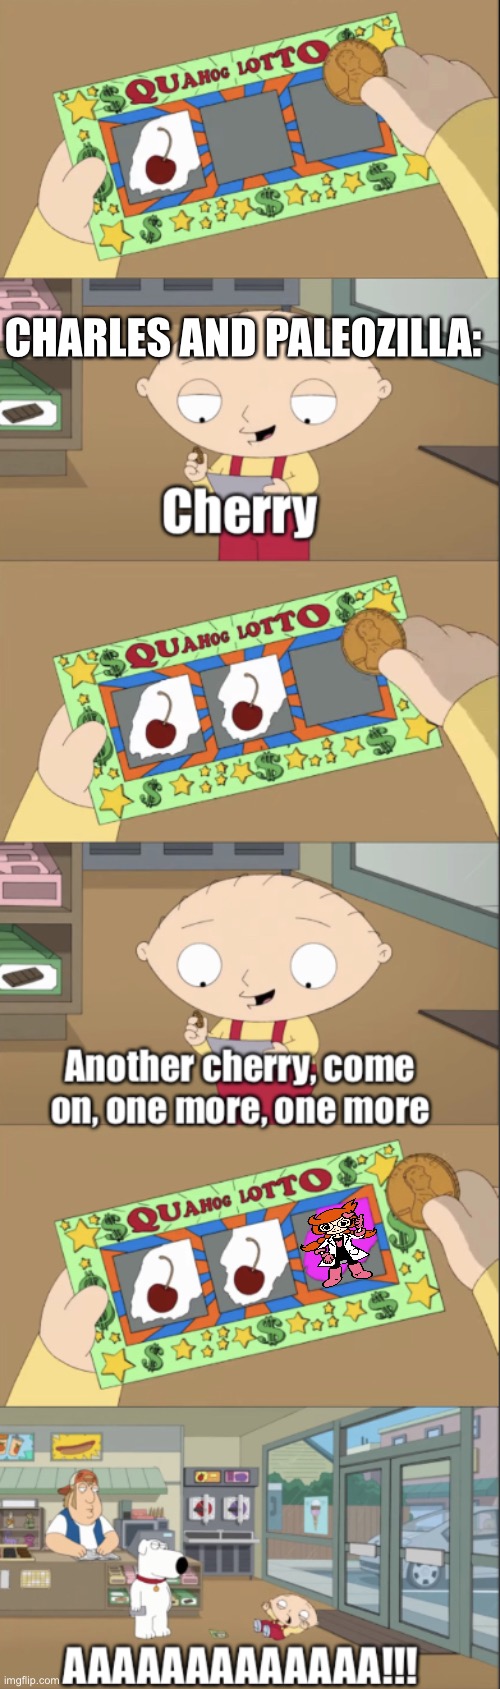 Stewie scratch card | CHARLES AND PALEOZILLA: | image tagged in stewie scratch card | made w/ Imgflip meme maker